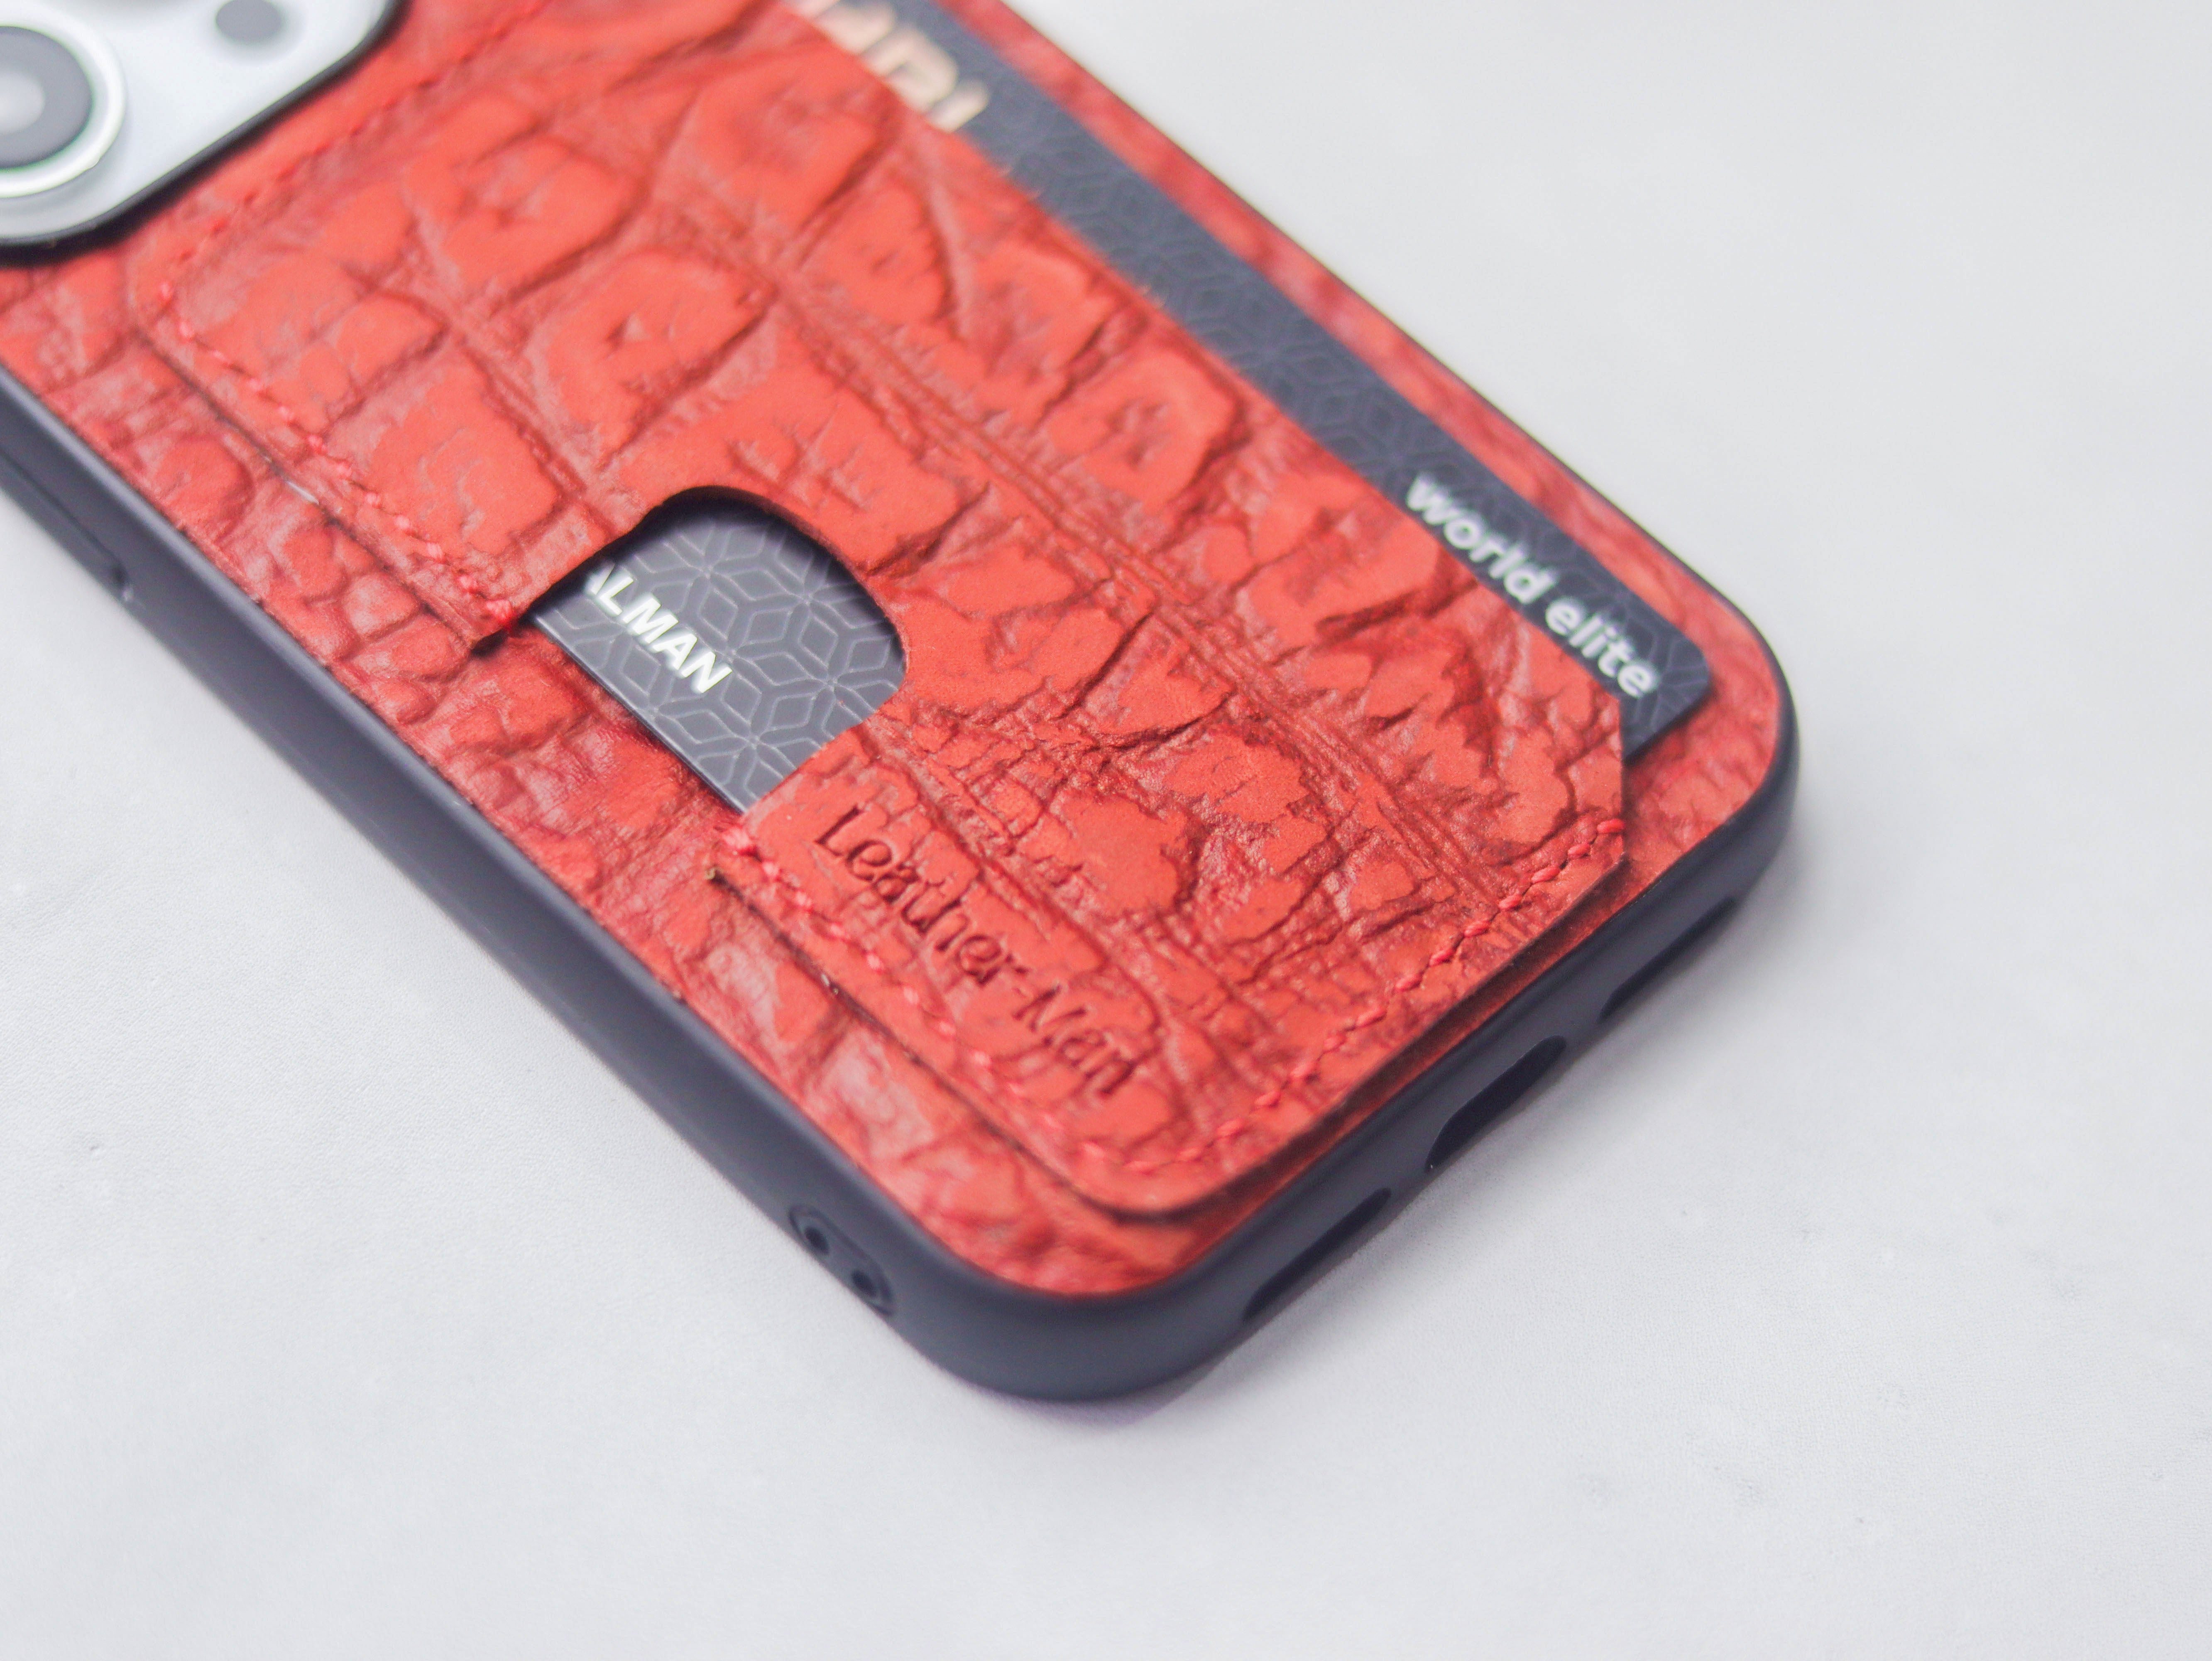 TEXTURED RED LEATHER - WALLET PHONE CASE